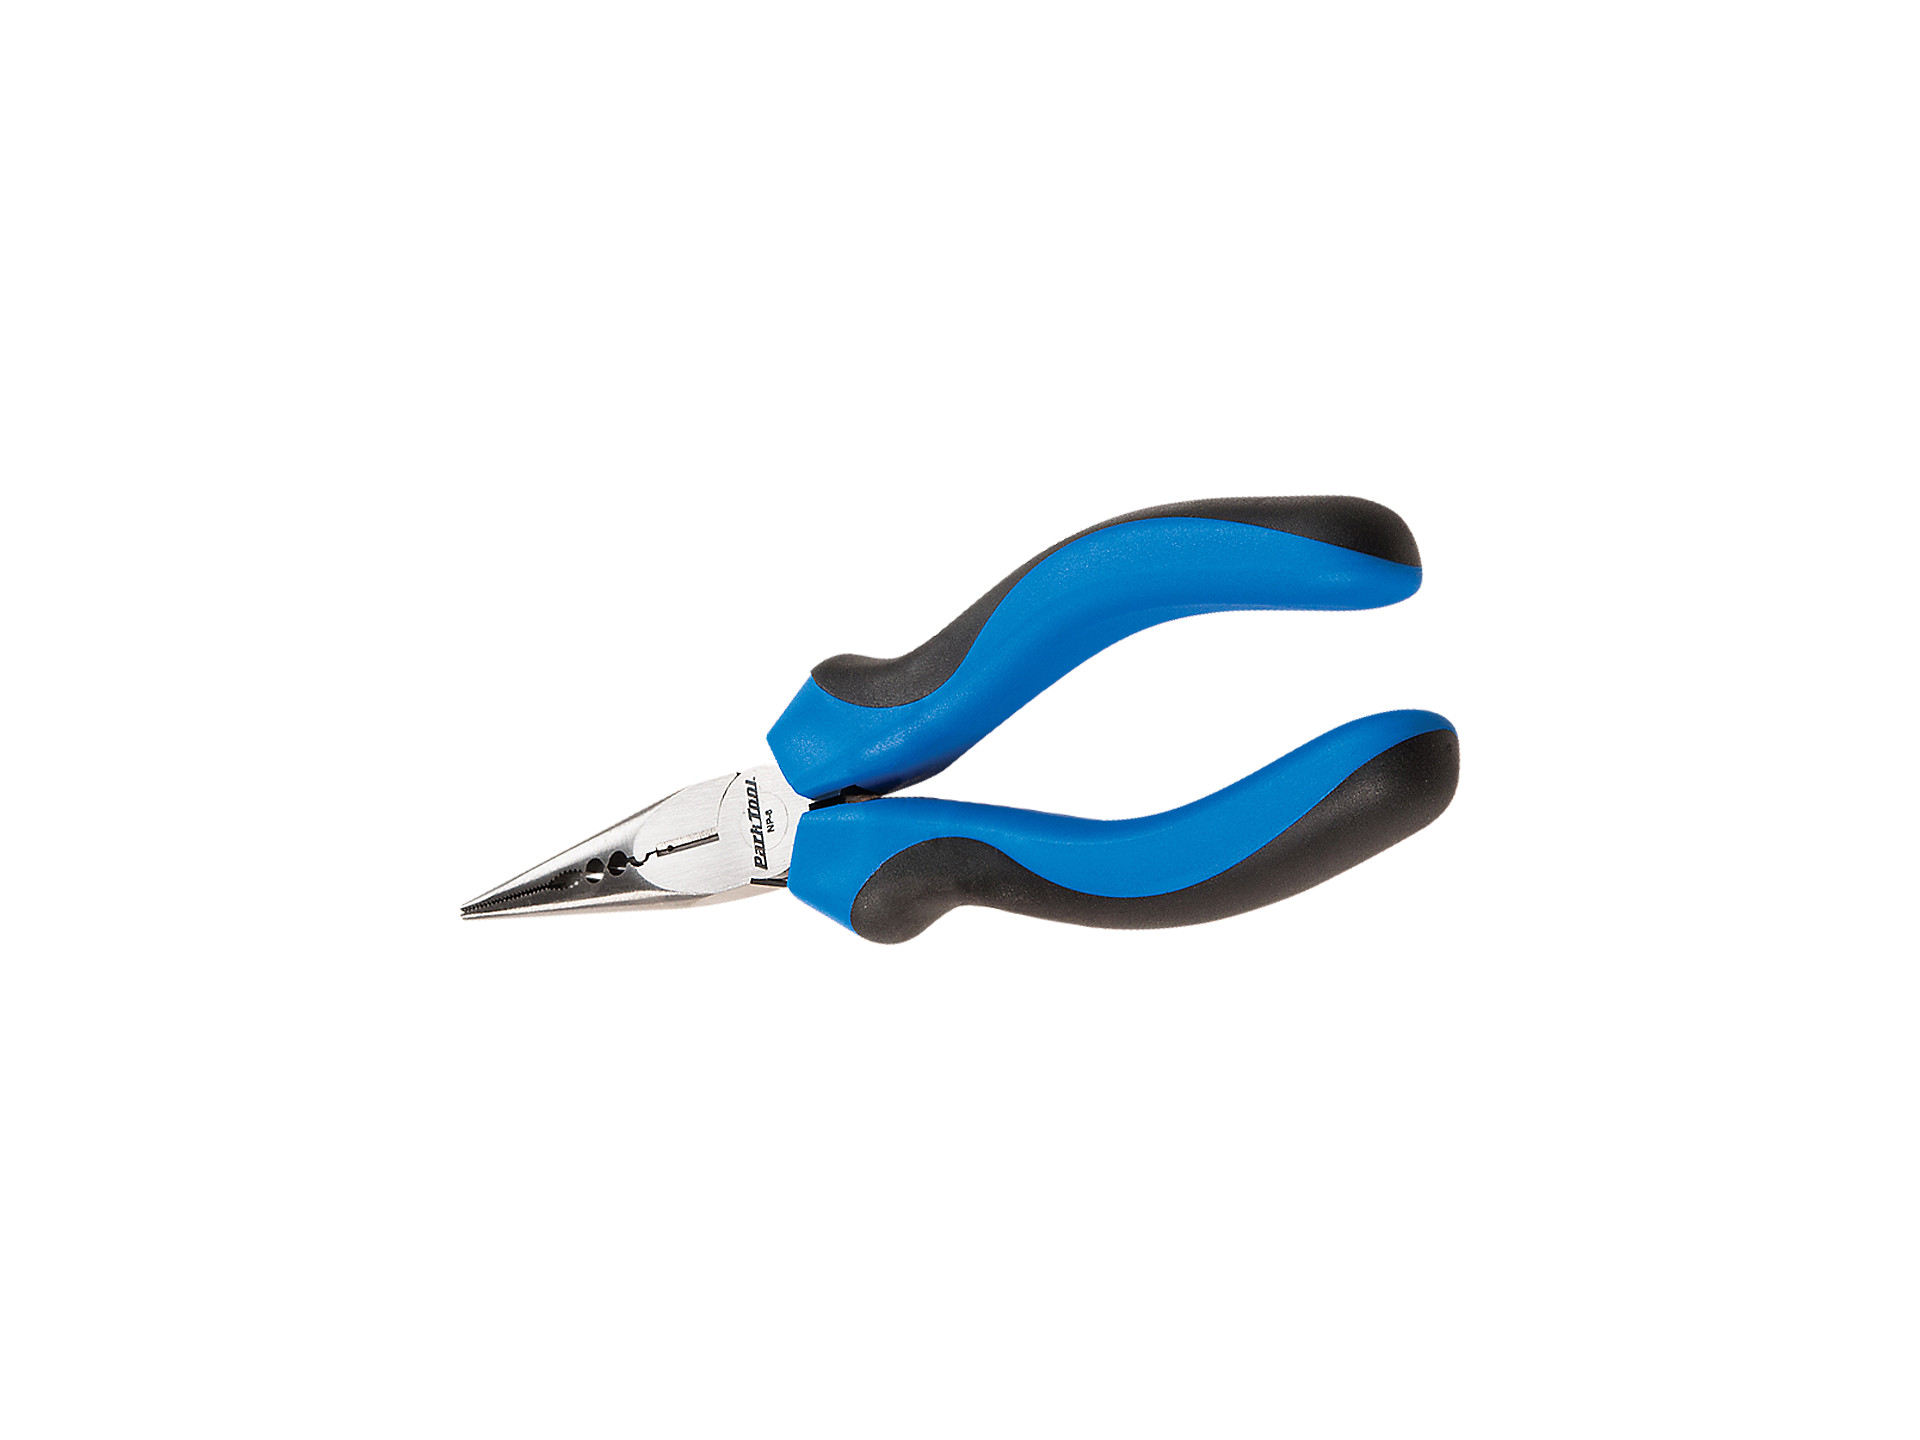 Park Tool Np6 Bike Bicycle Workshop Needle Nose Pliers for sale online 